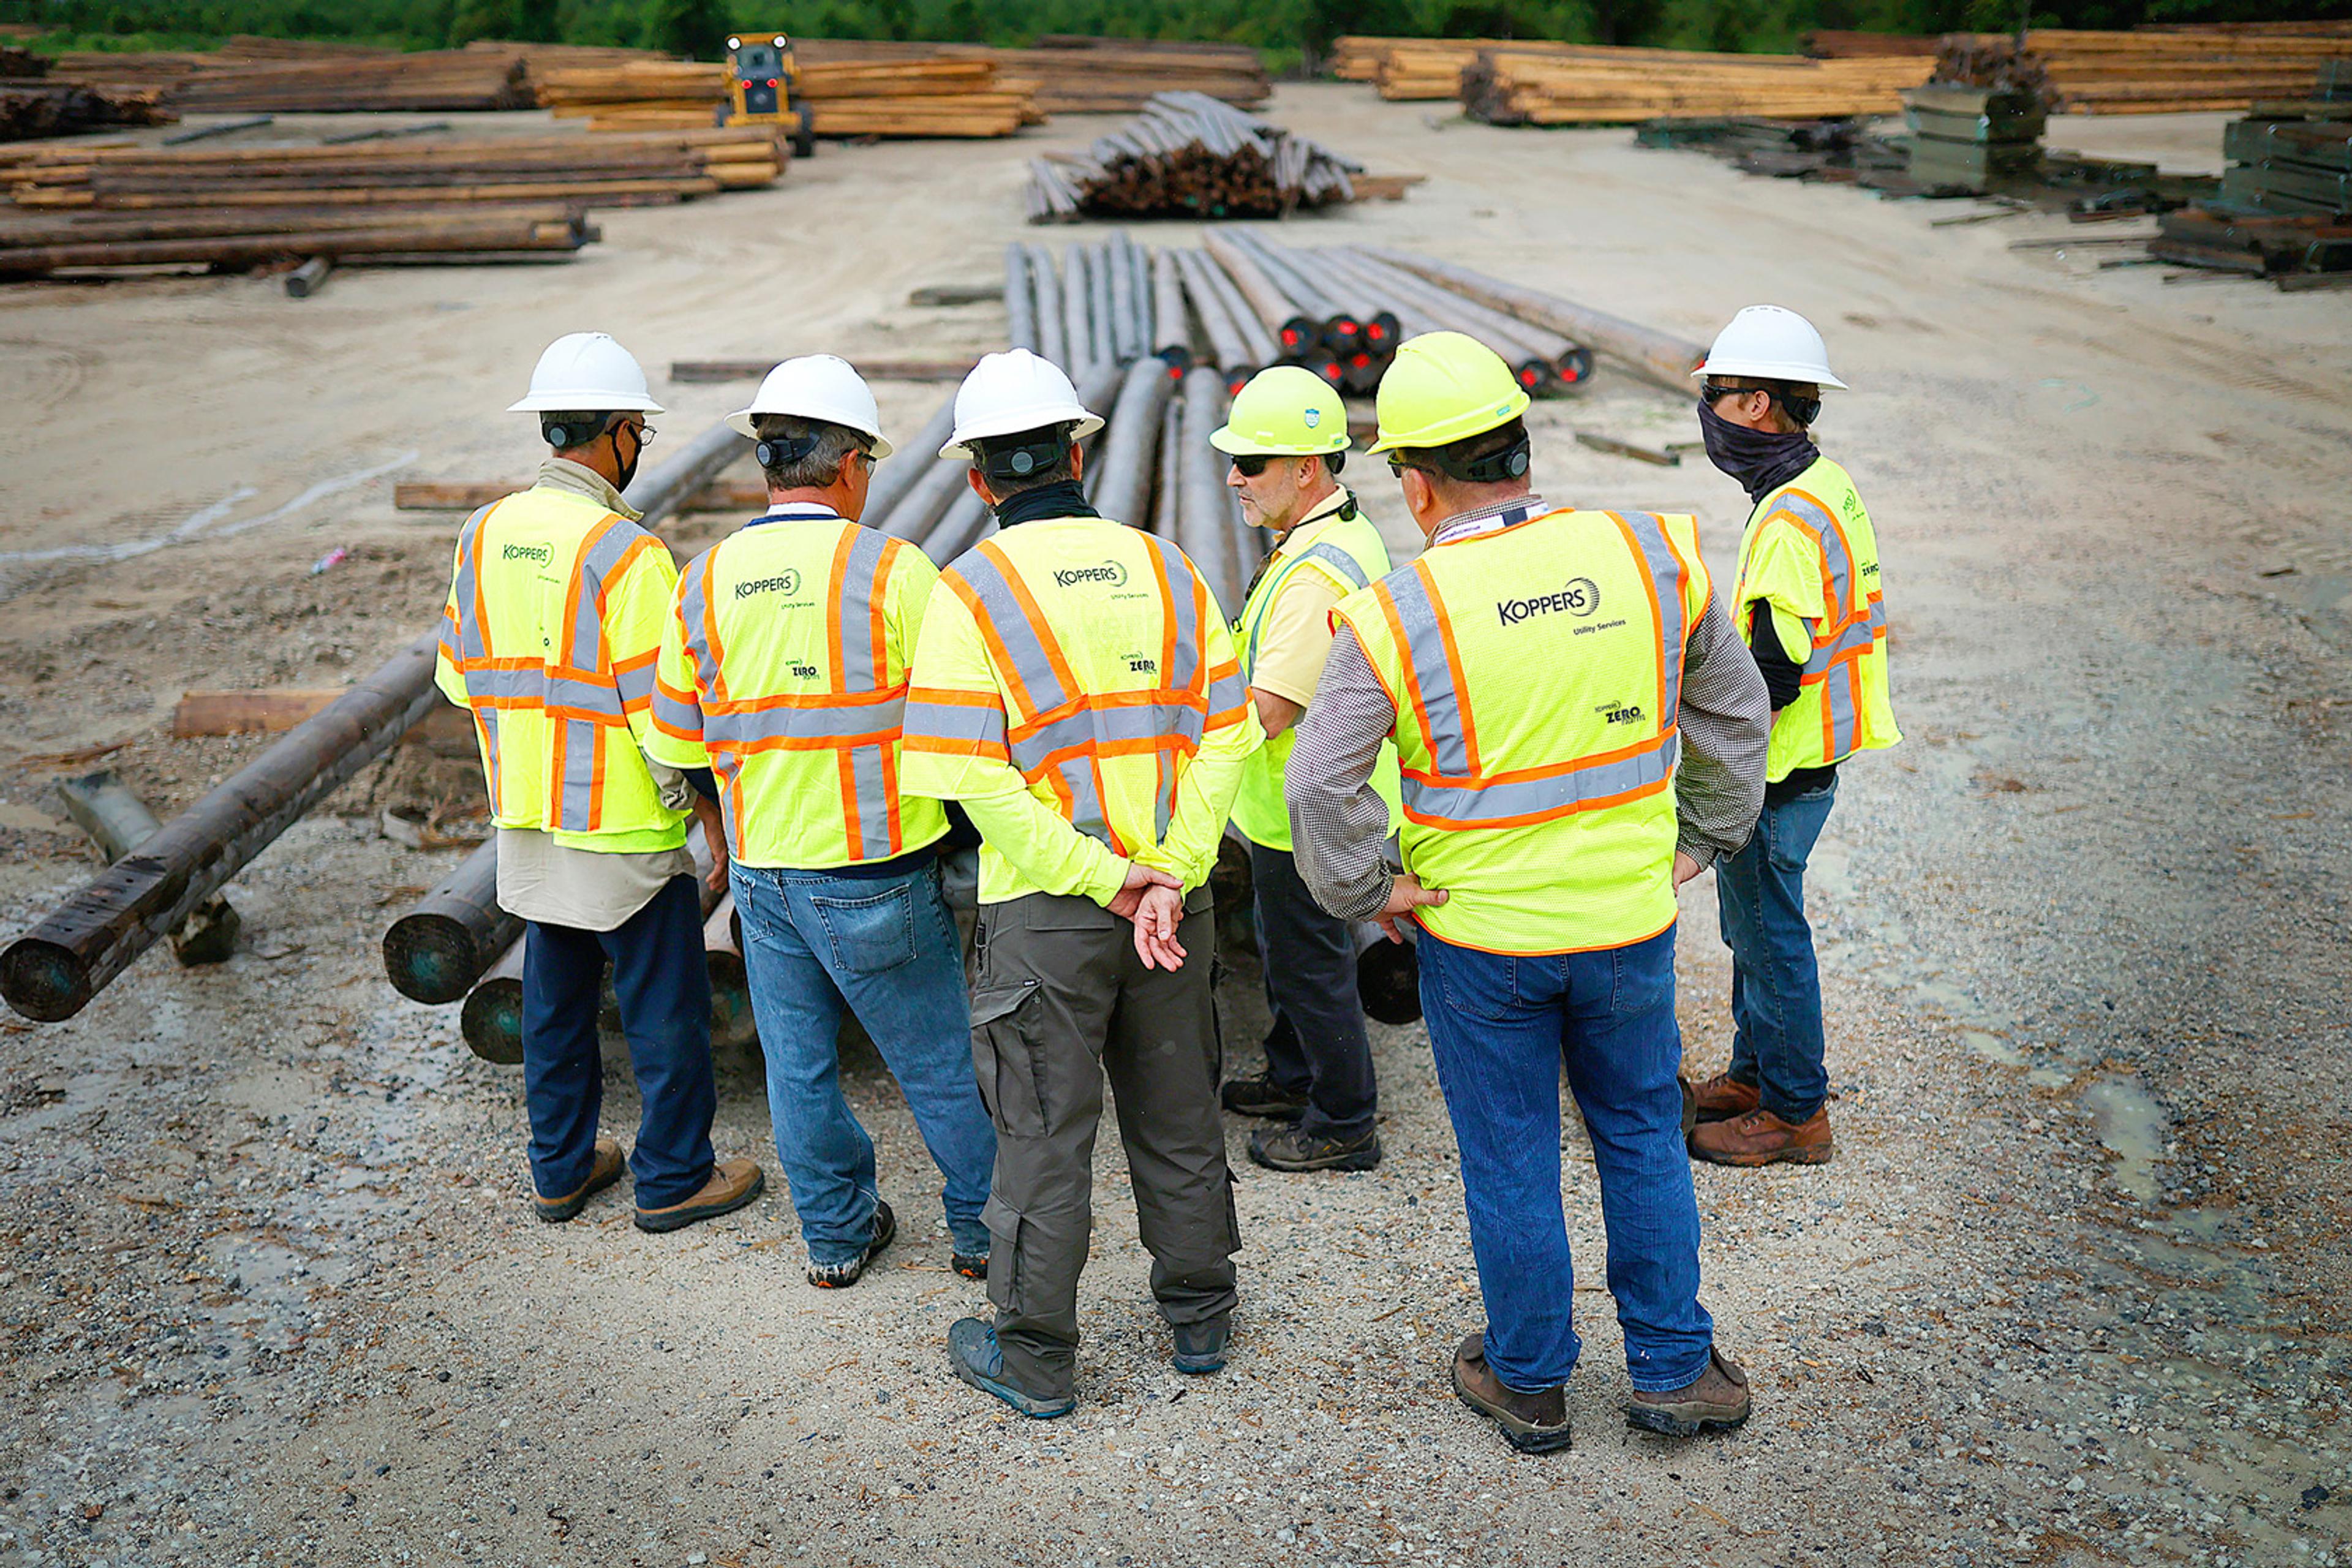 Koppers employees with safety vests and hard hats